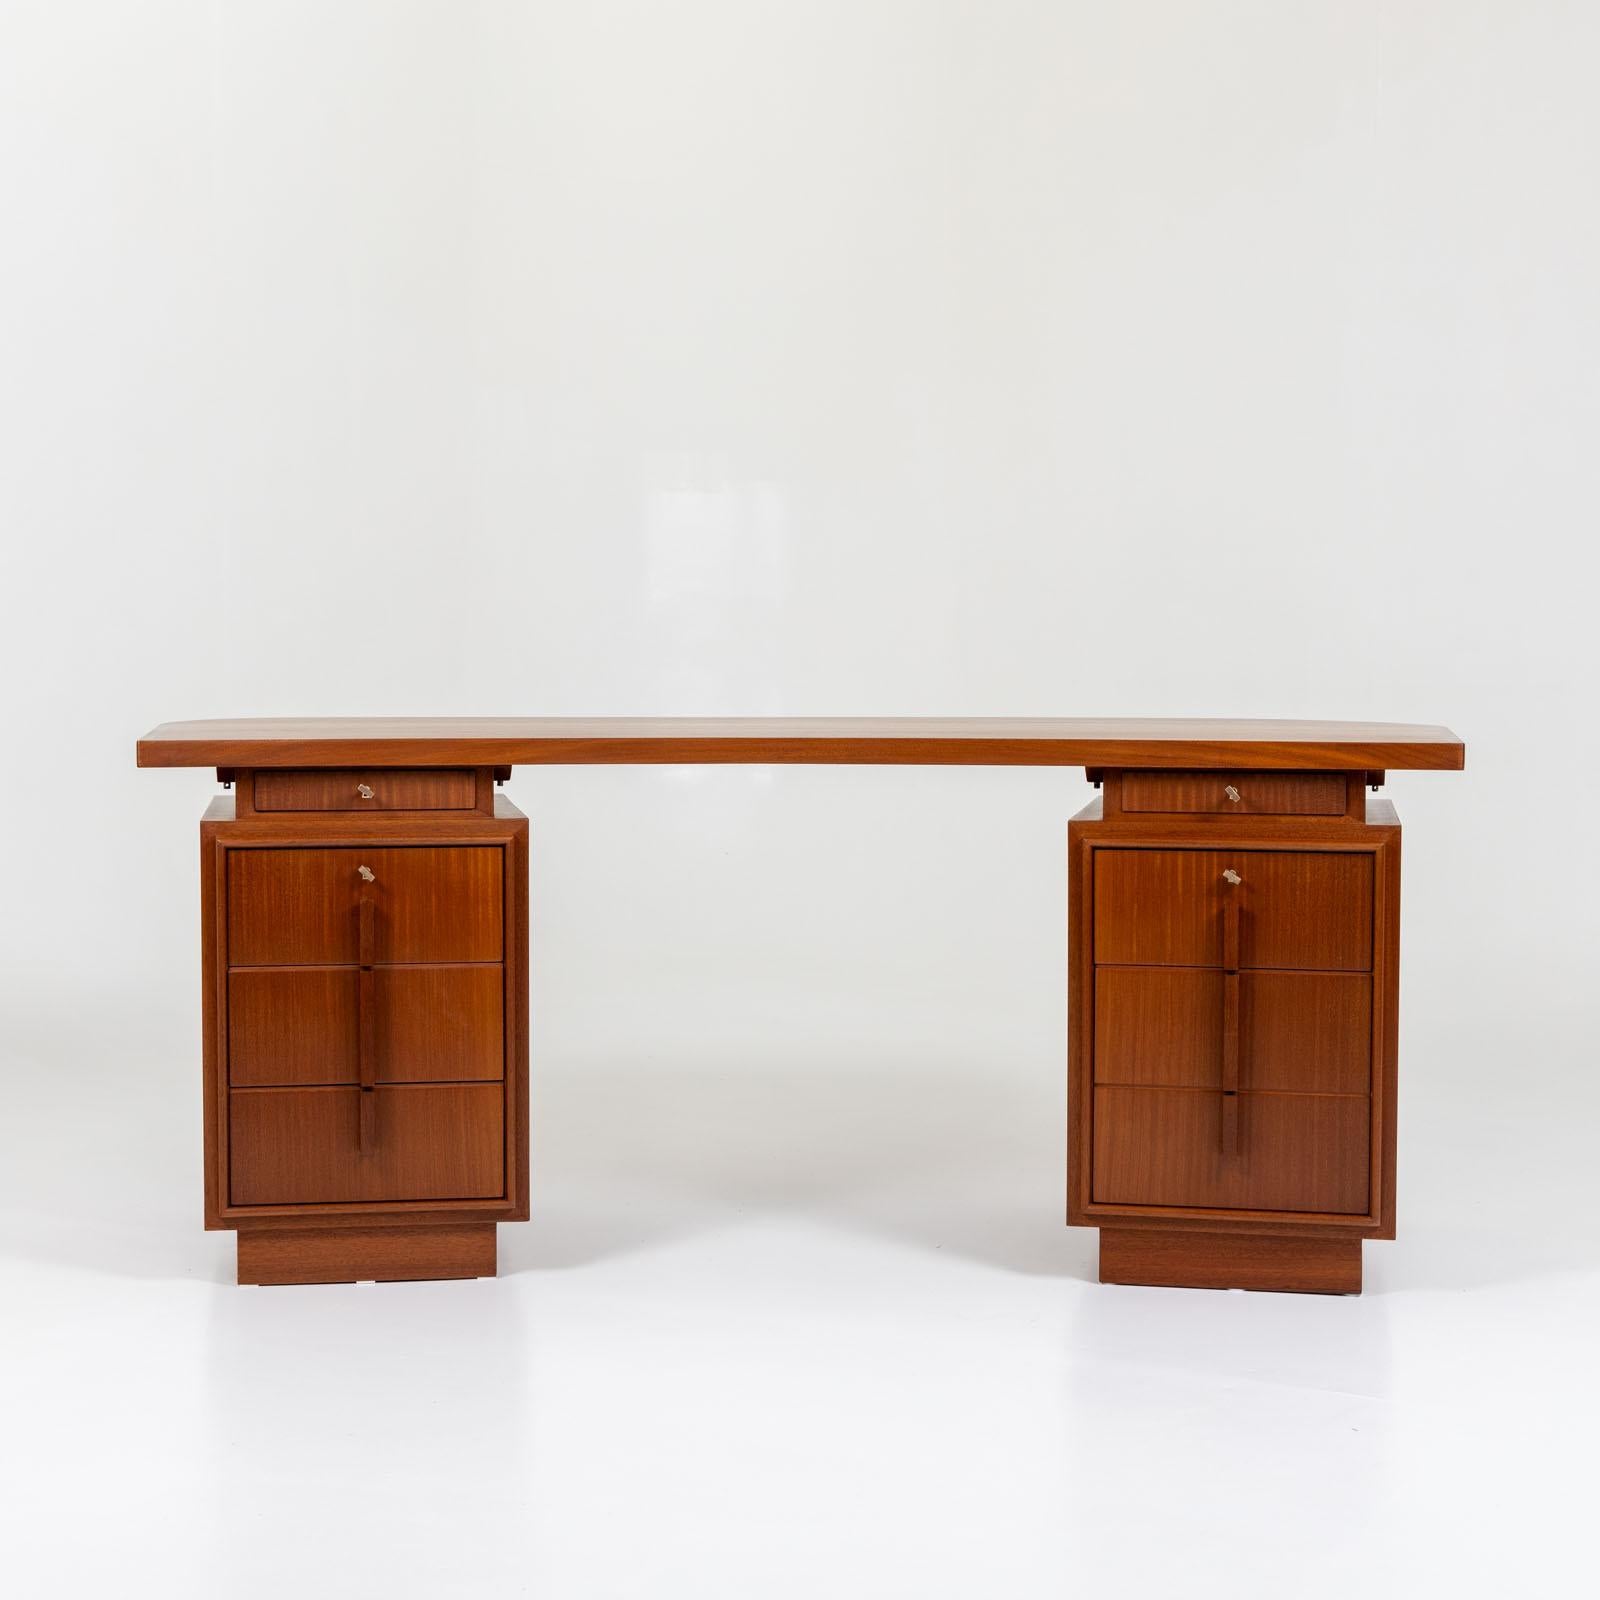 Art Deco desk with slightly curved table top and two drawer elements with four drawers each. These are lockable and the handles are made of elegant bars. The desk can be positioned anywhere in the room thanks to the fully veneered back.  